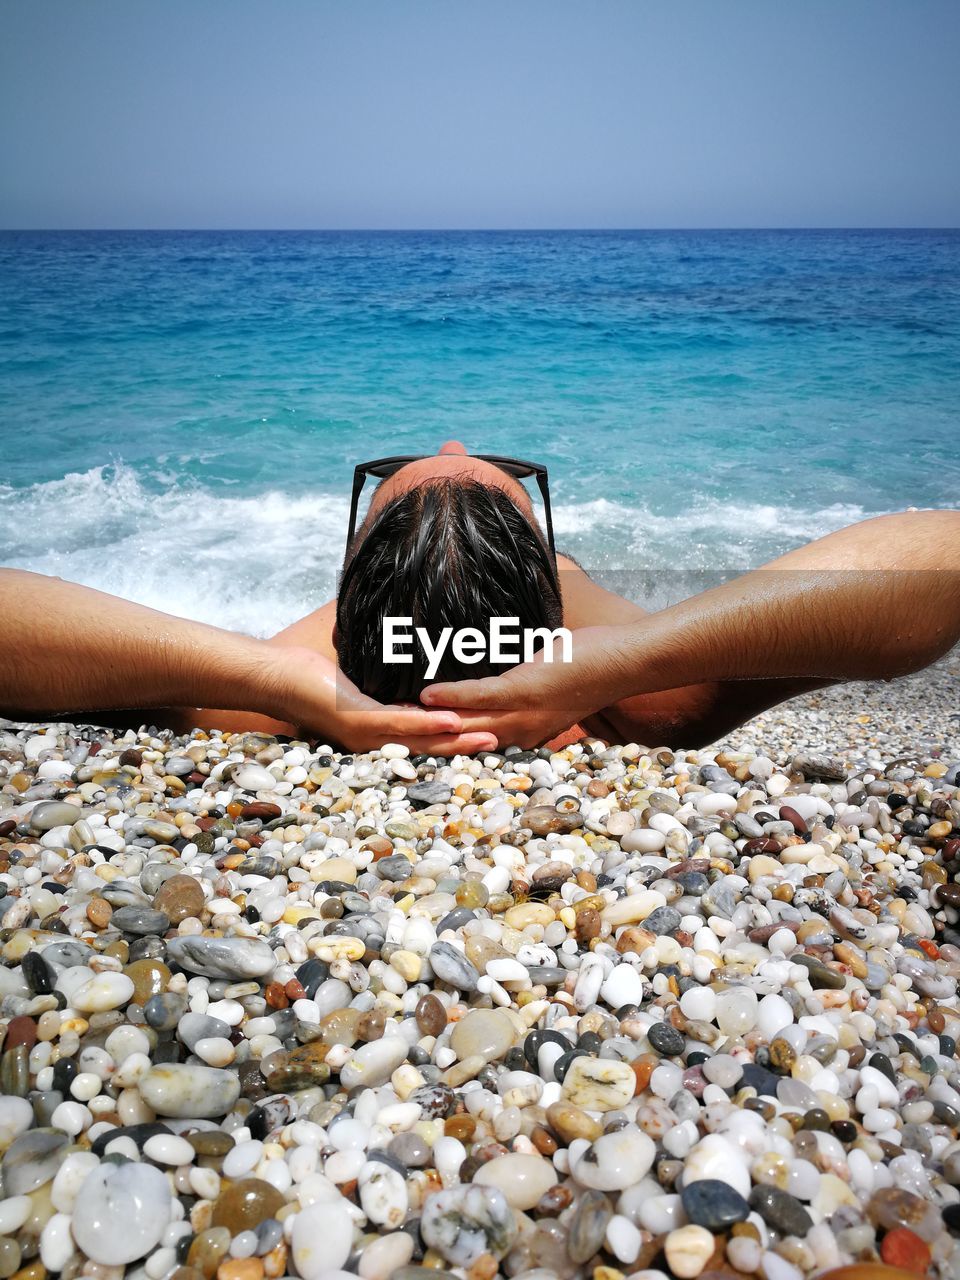 Man lying on pebbles shore at beach against sky during sunny day